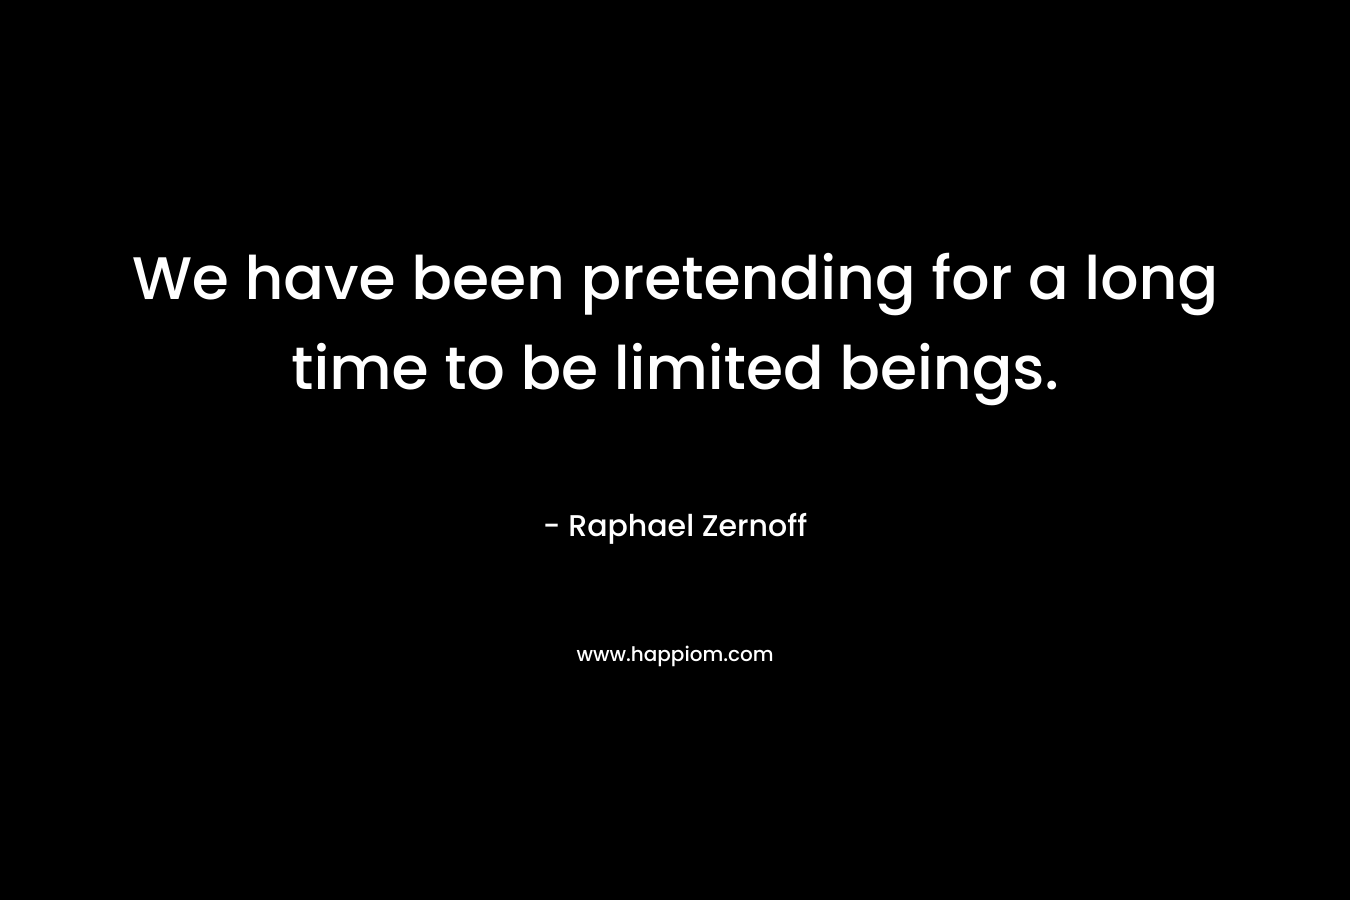 We have been pretending for a long time to be limited beings. – Raphael Zernoff